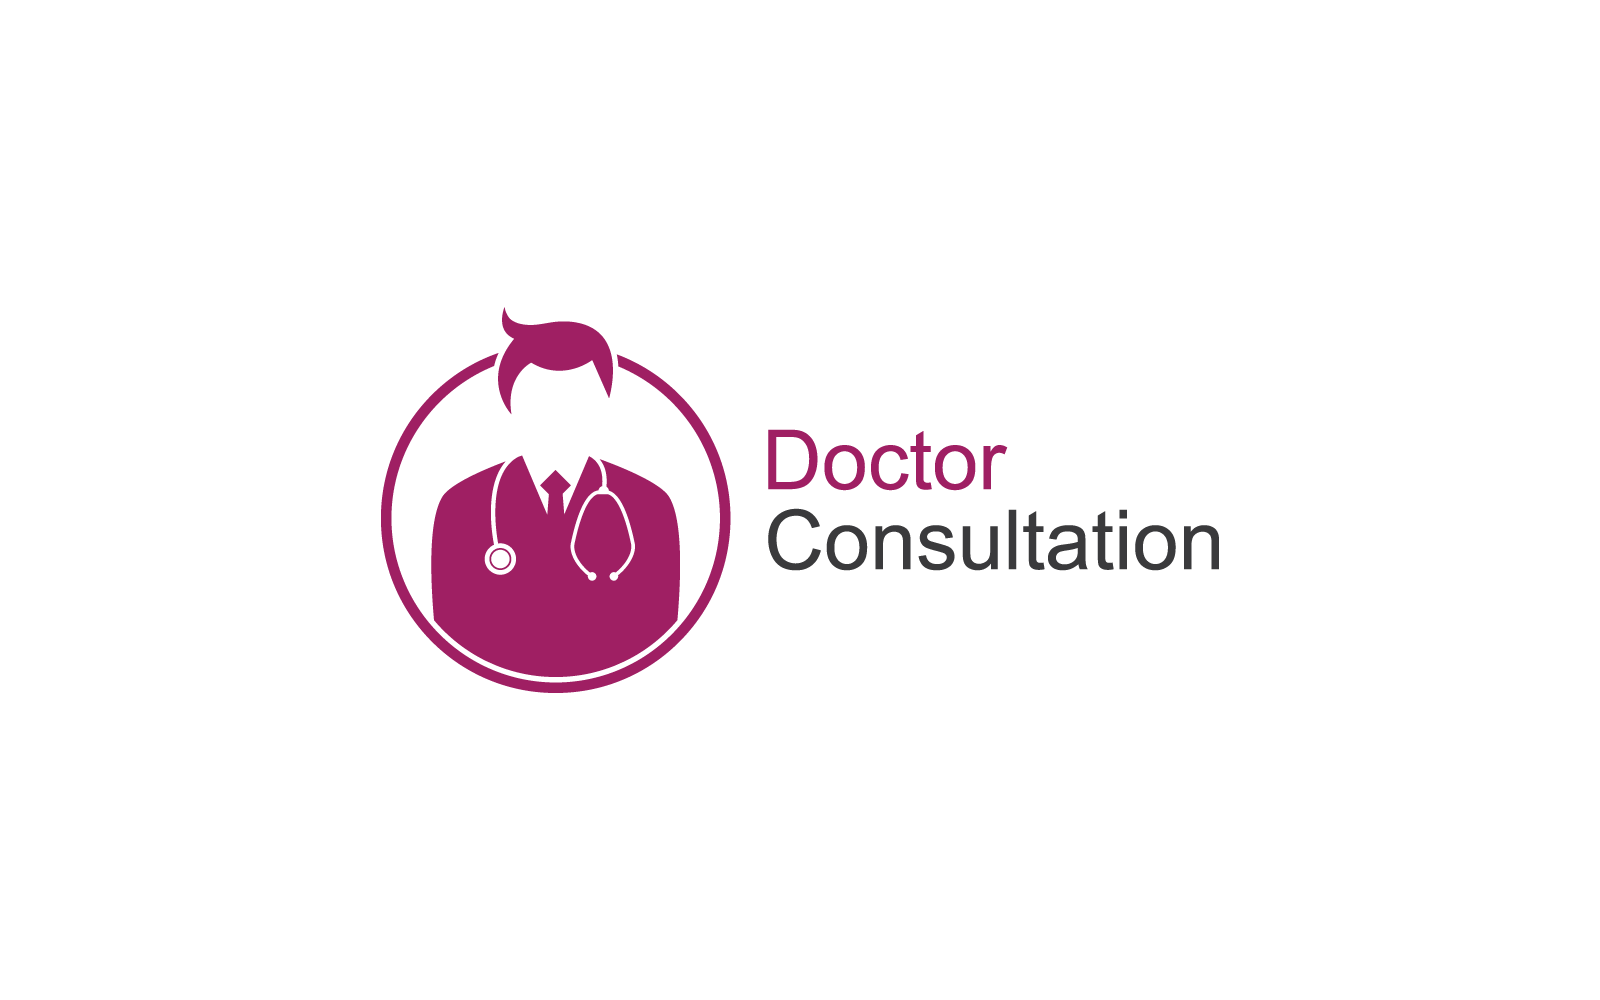 Illustration of health workers,doctor icon vector design